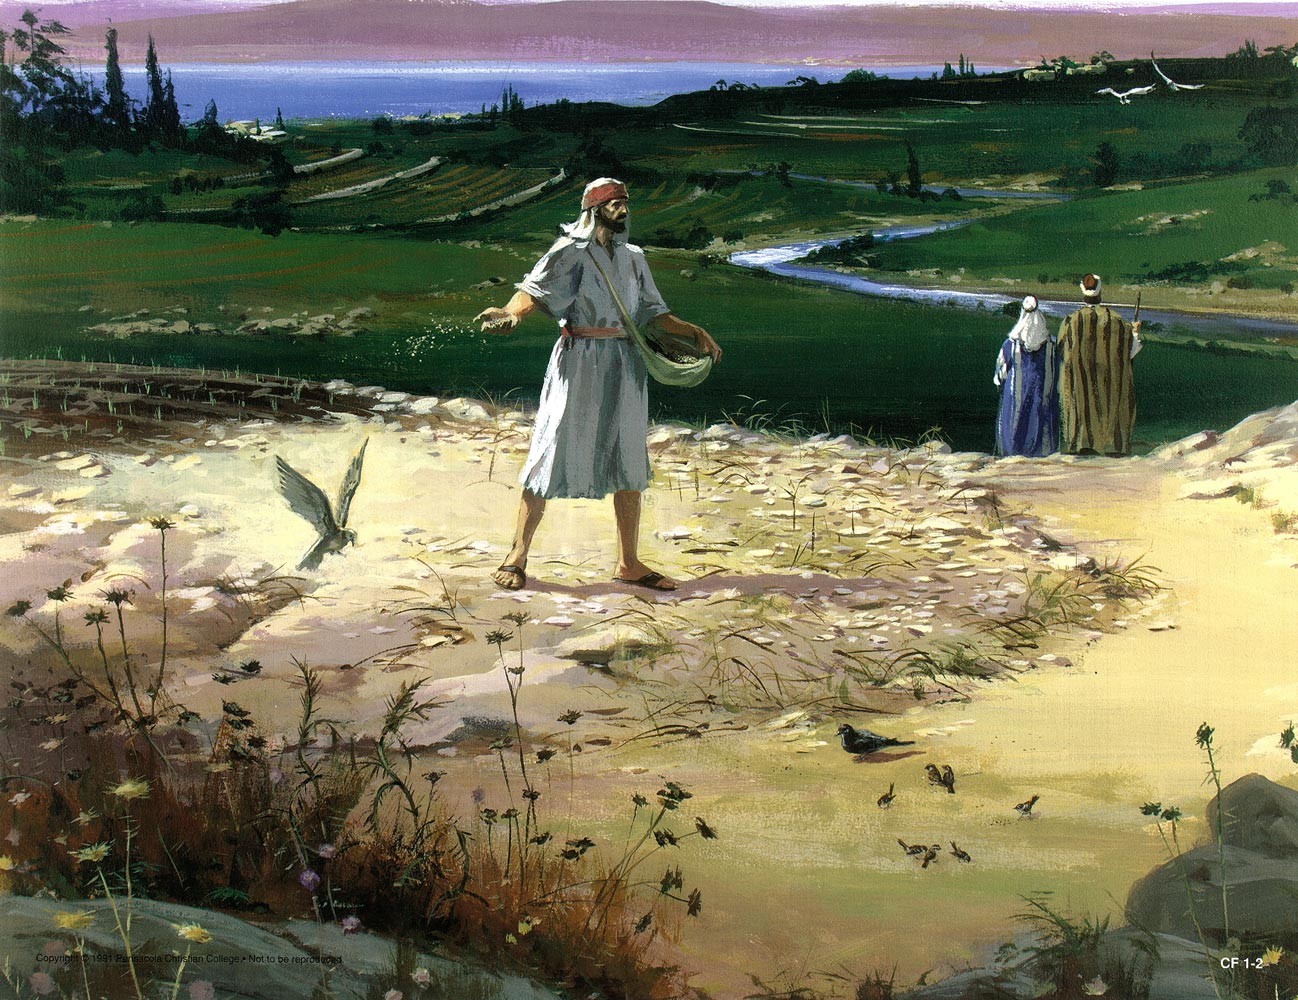 Parable of the Sower by Damian Duffy